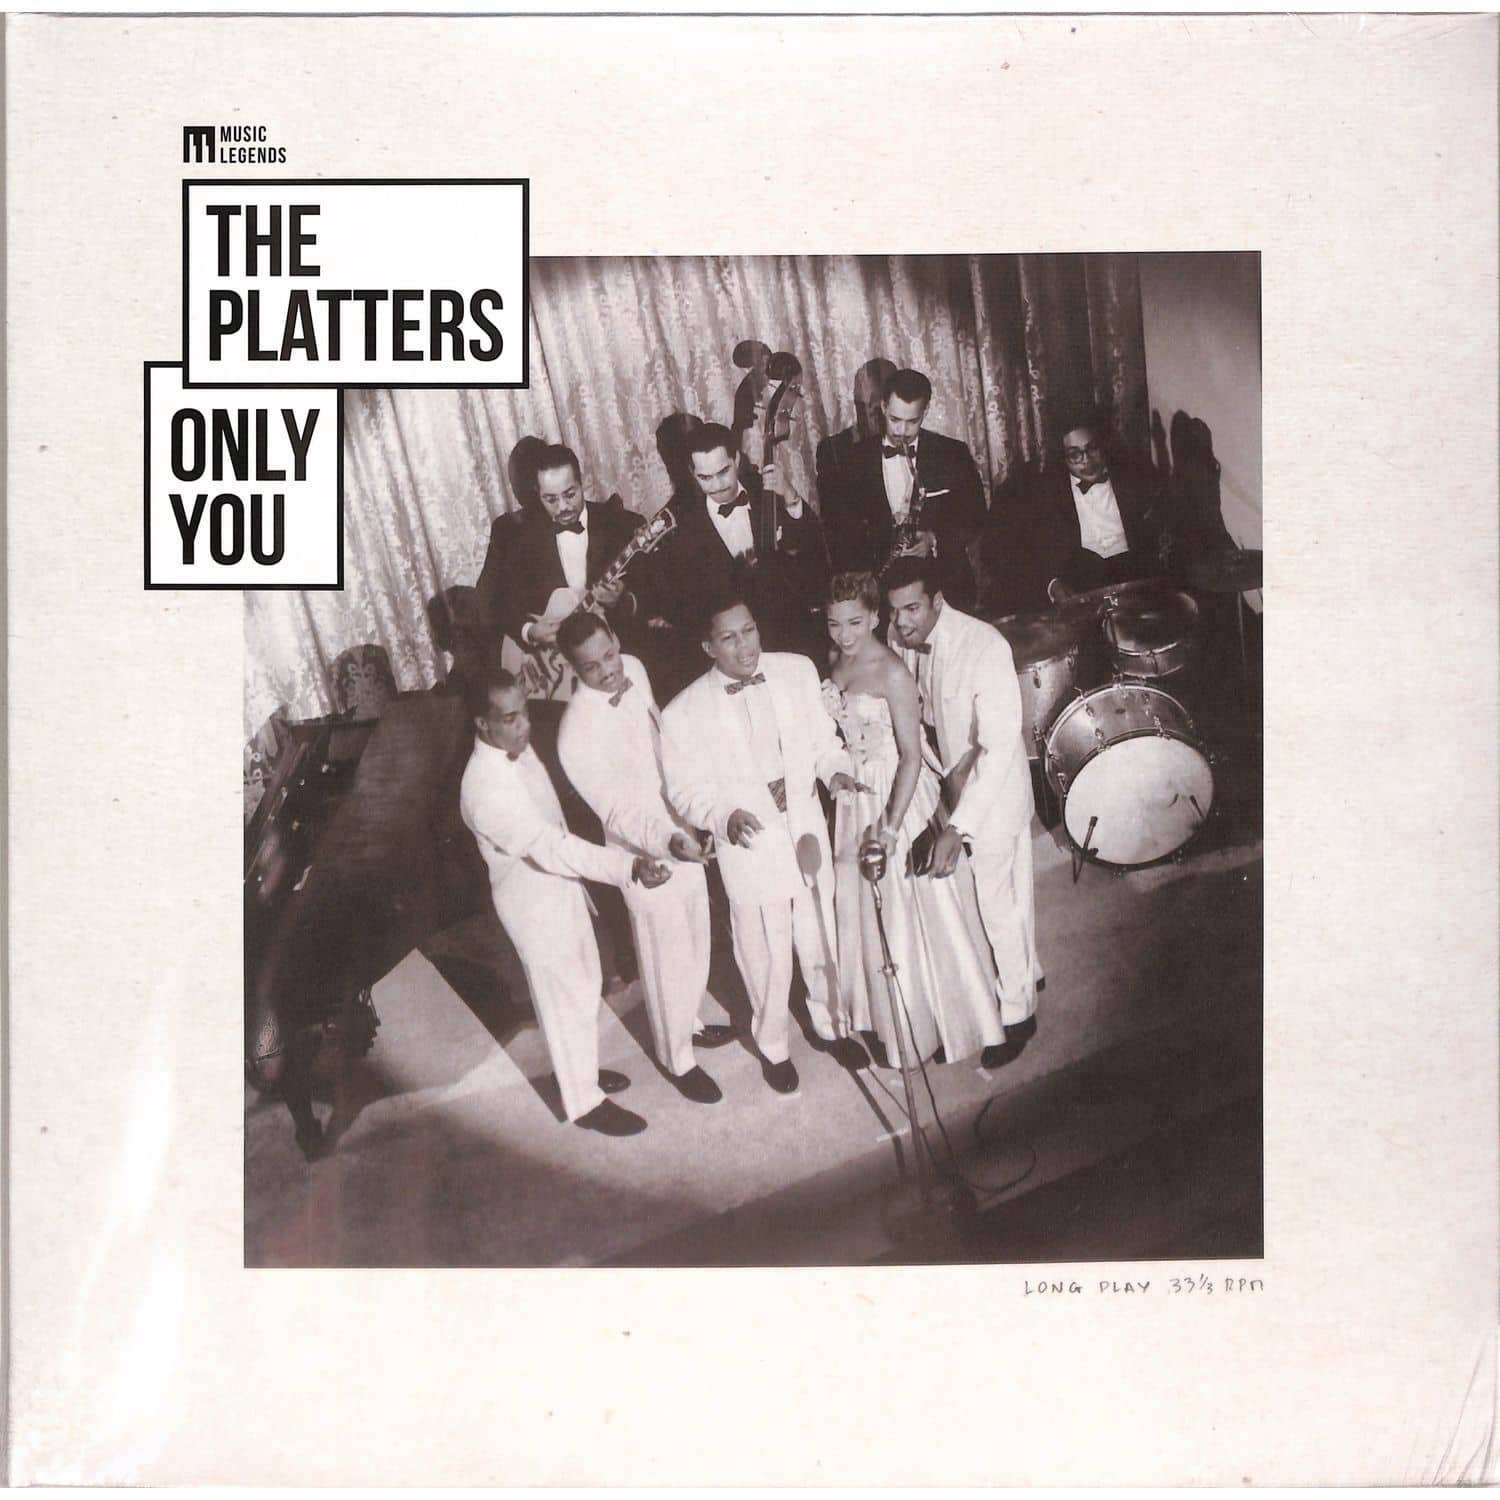 The Platters - ONLY YOU 